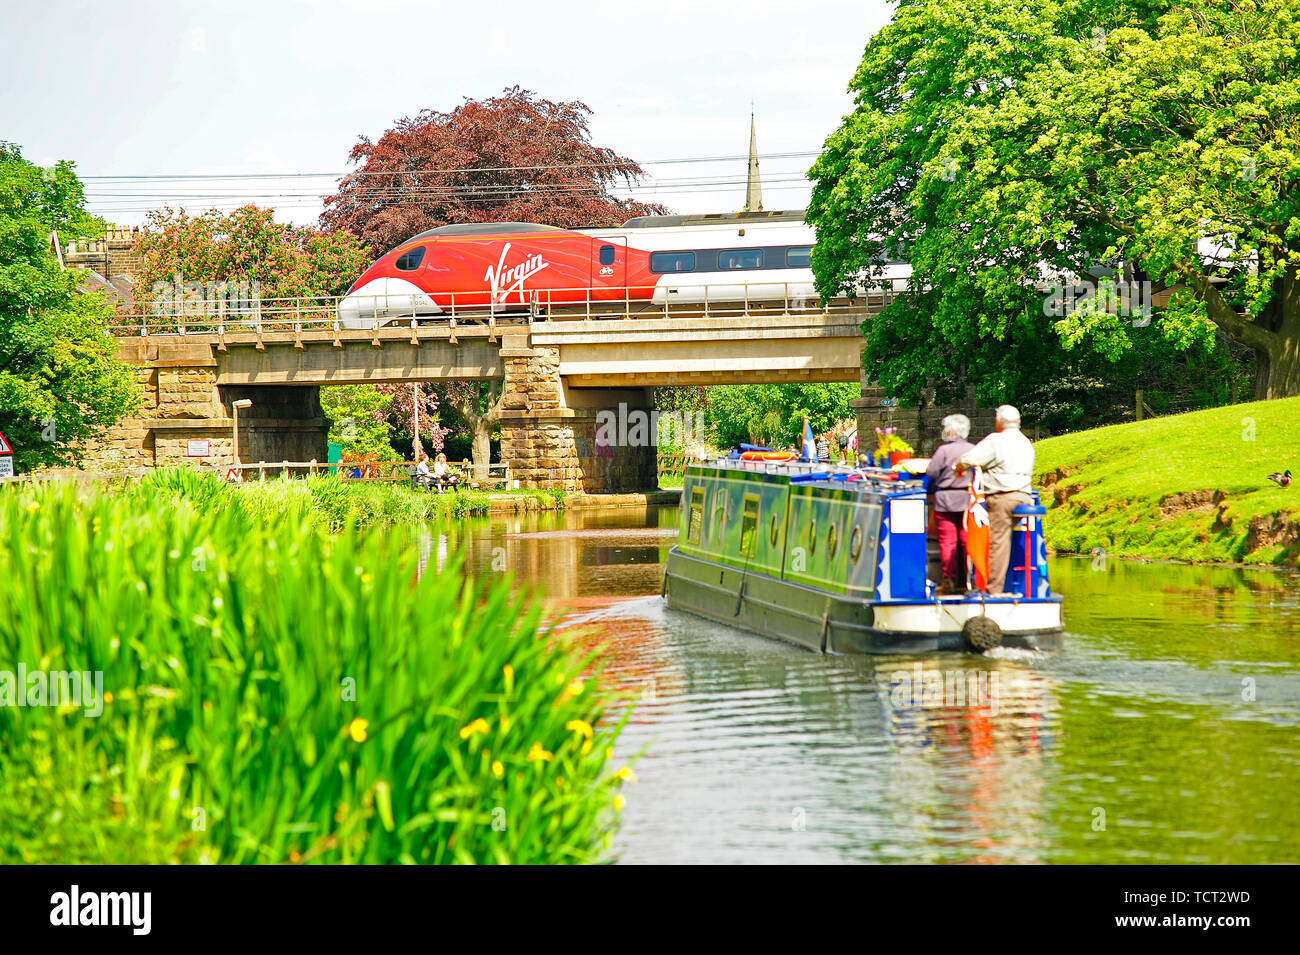 Virgin inter city train speeding over a bridge on the Lancaster Canal with slow moving narrow boat passing underneath at Lancaster on a sunny day Stock Photo